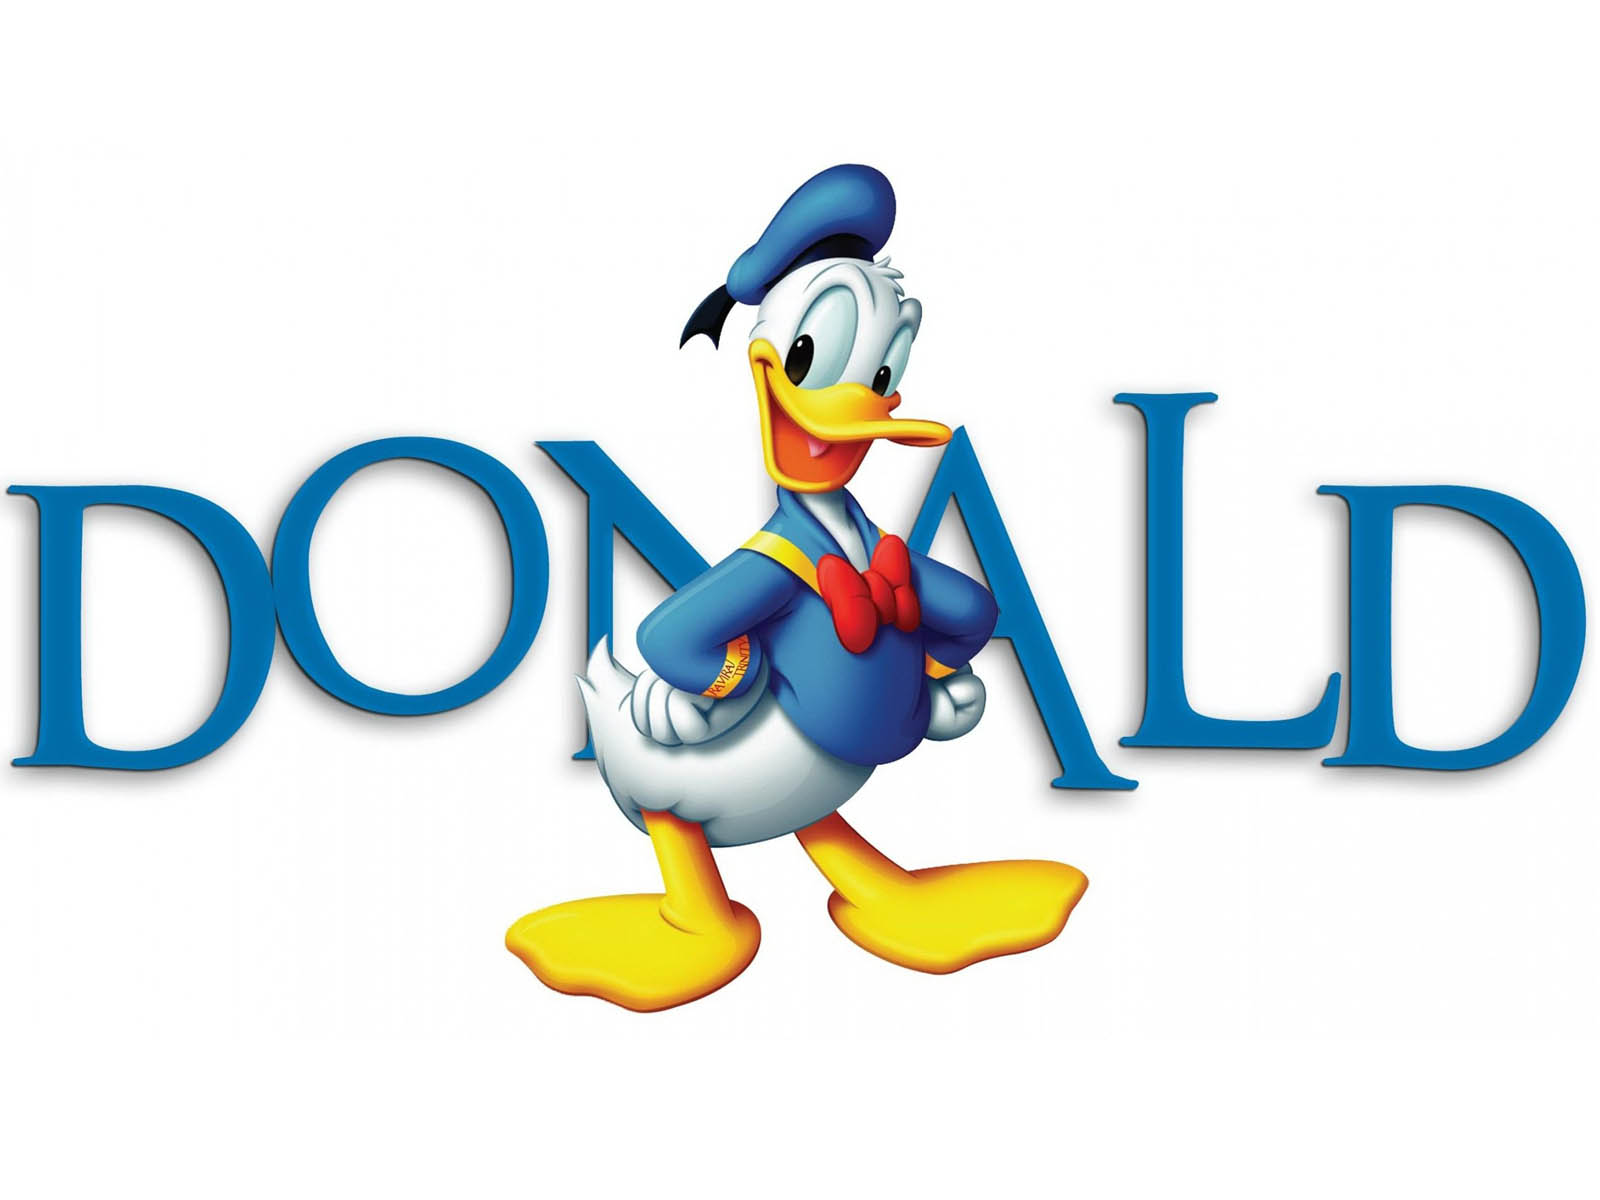 DONALD DUCK HD WALLPAPERS | FREE HD WALLPAPERS